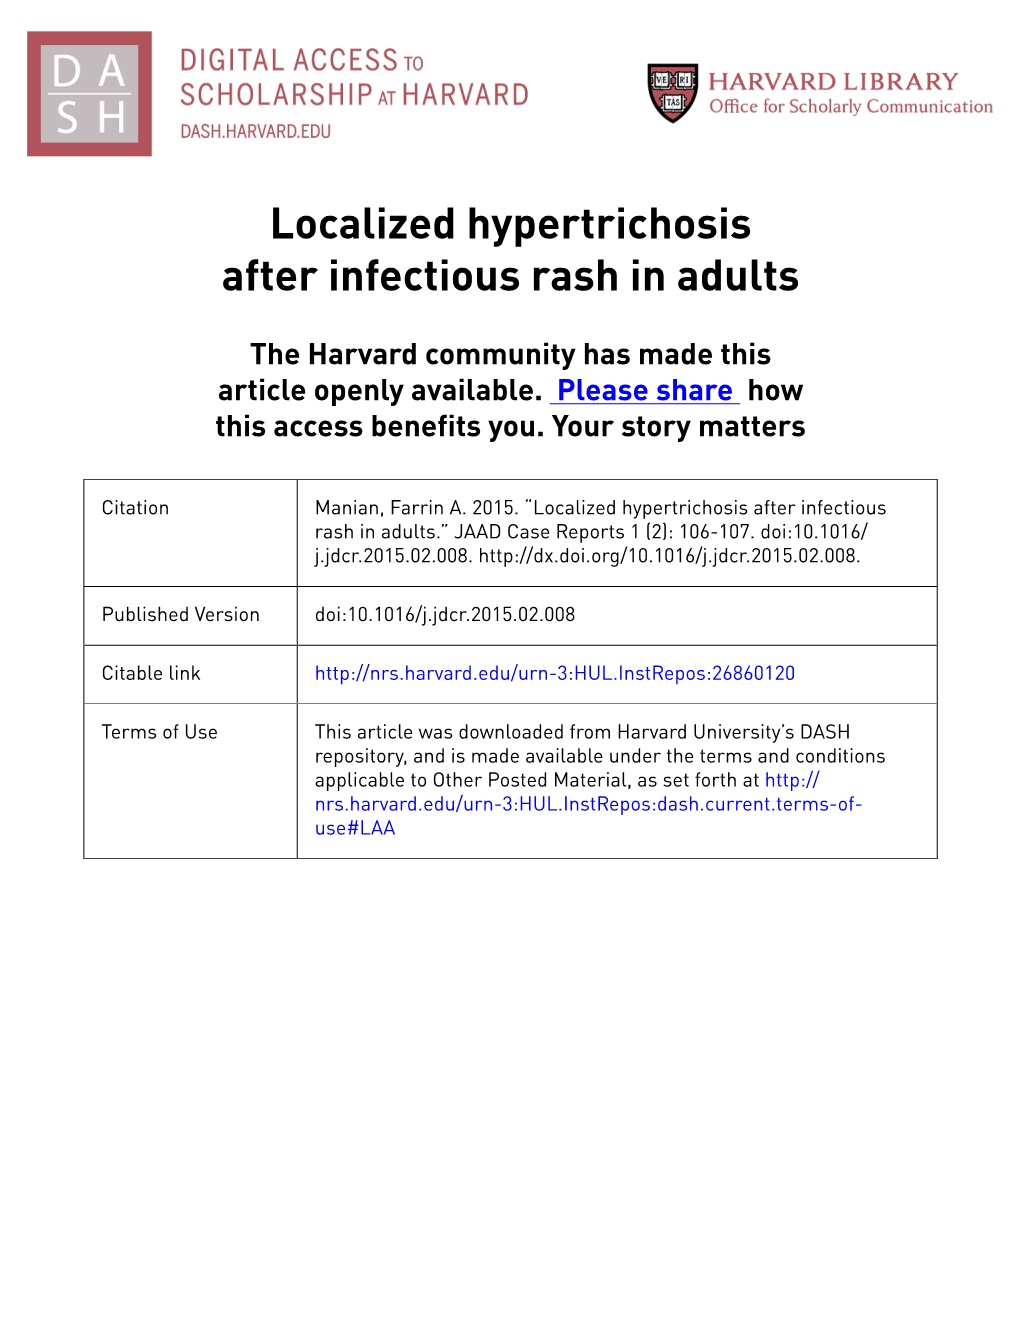 Localized Hypertrichosis After Infectious Rash in Adults